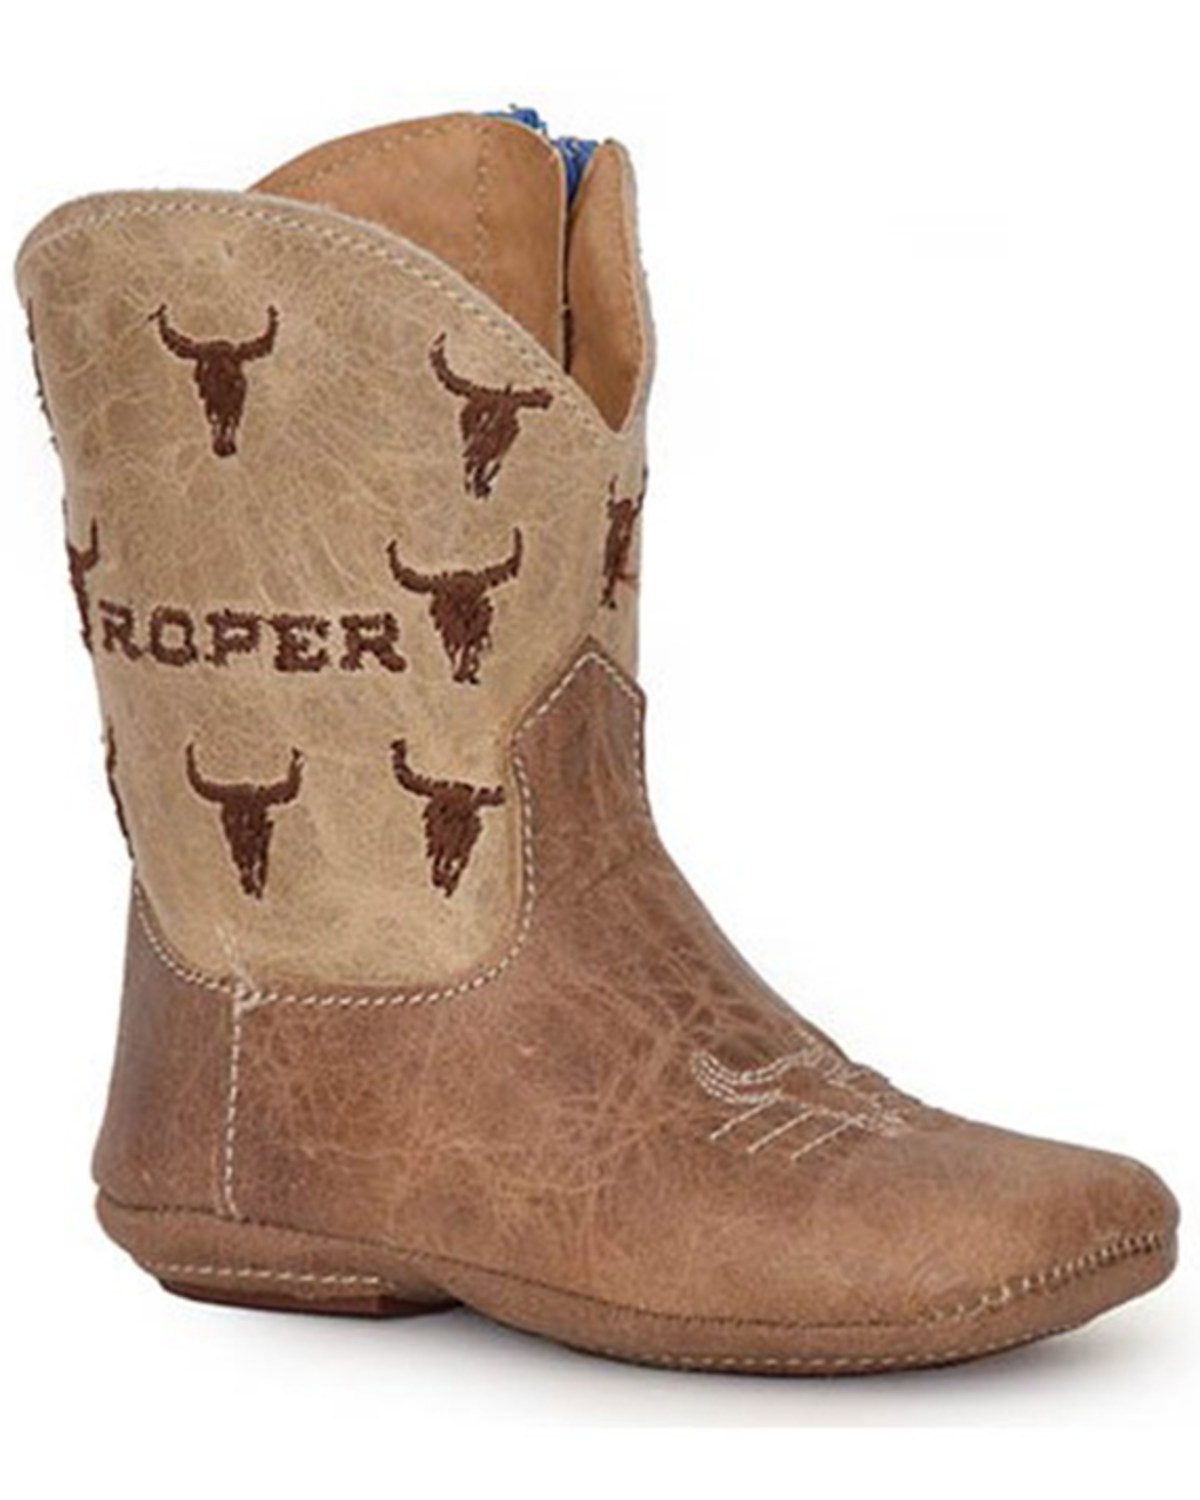 Roper Infant Boys' Steer Head Western Boots - Square Toe